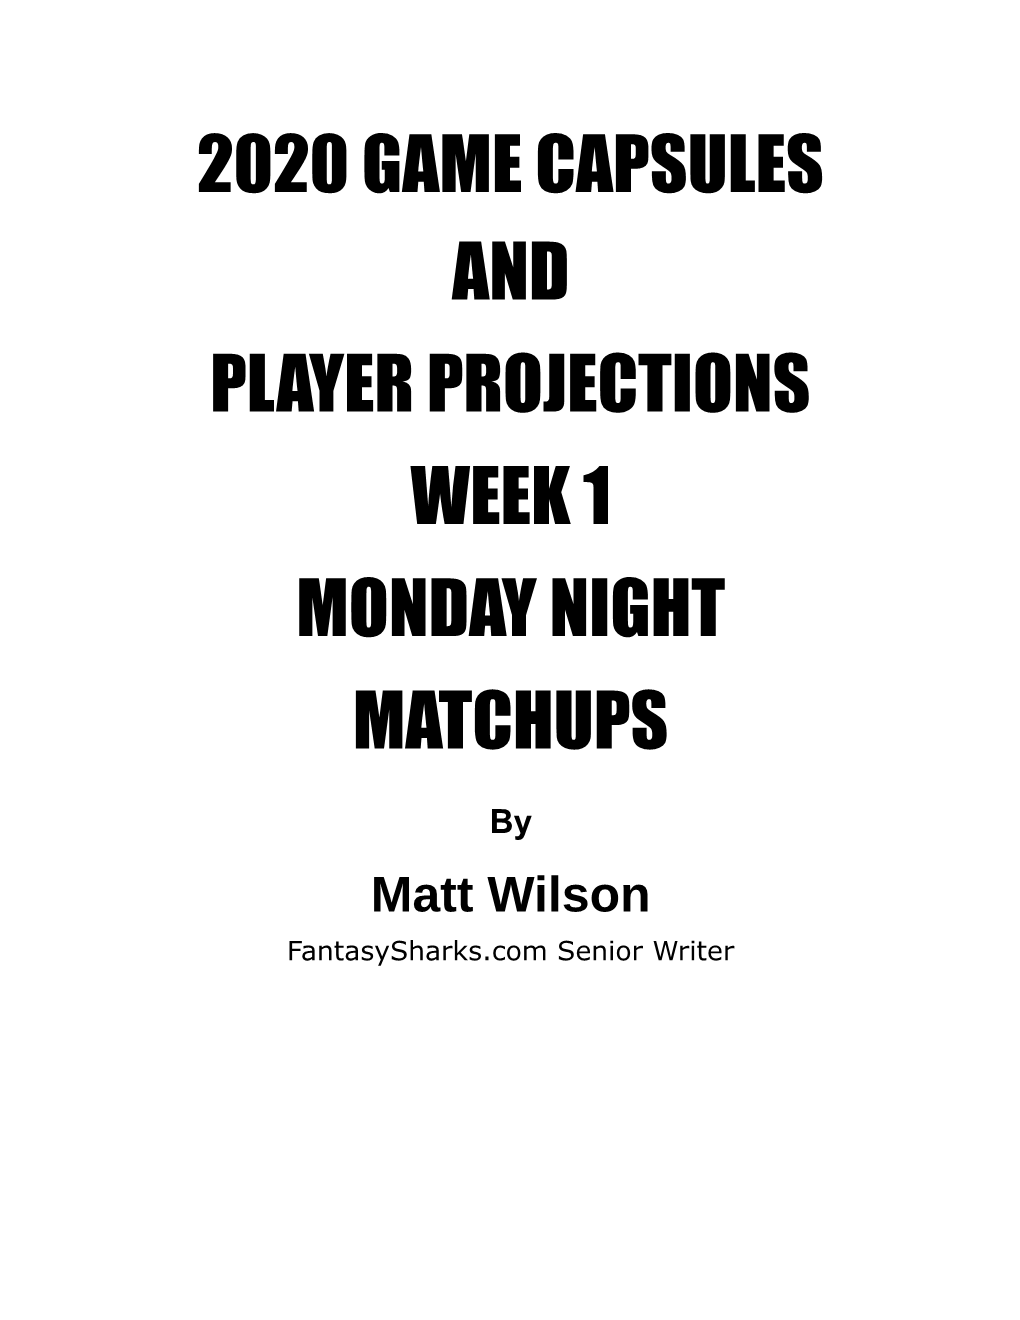 2020 Game Capsules and Player Projections Week 1 Monday Night Matchups